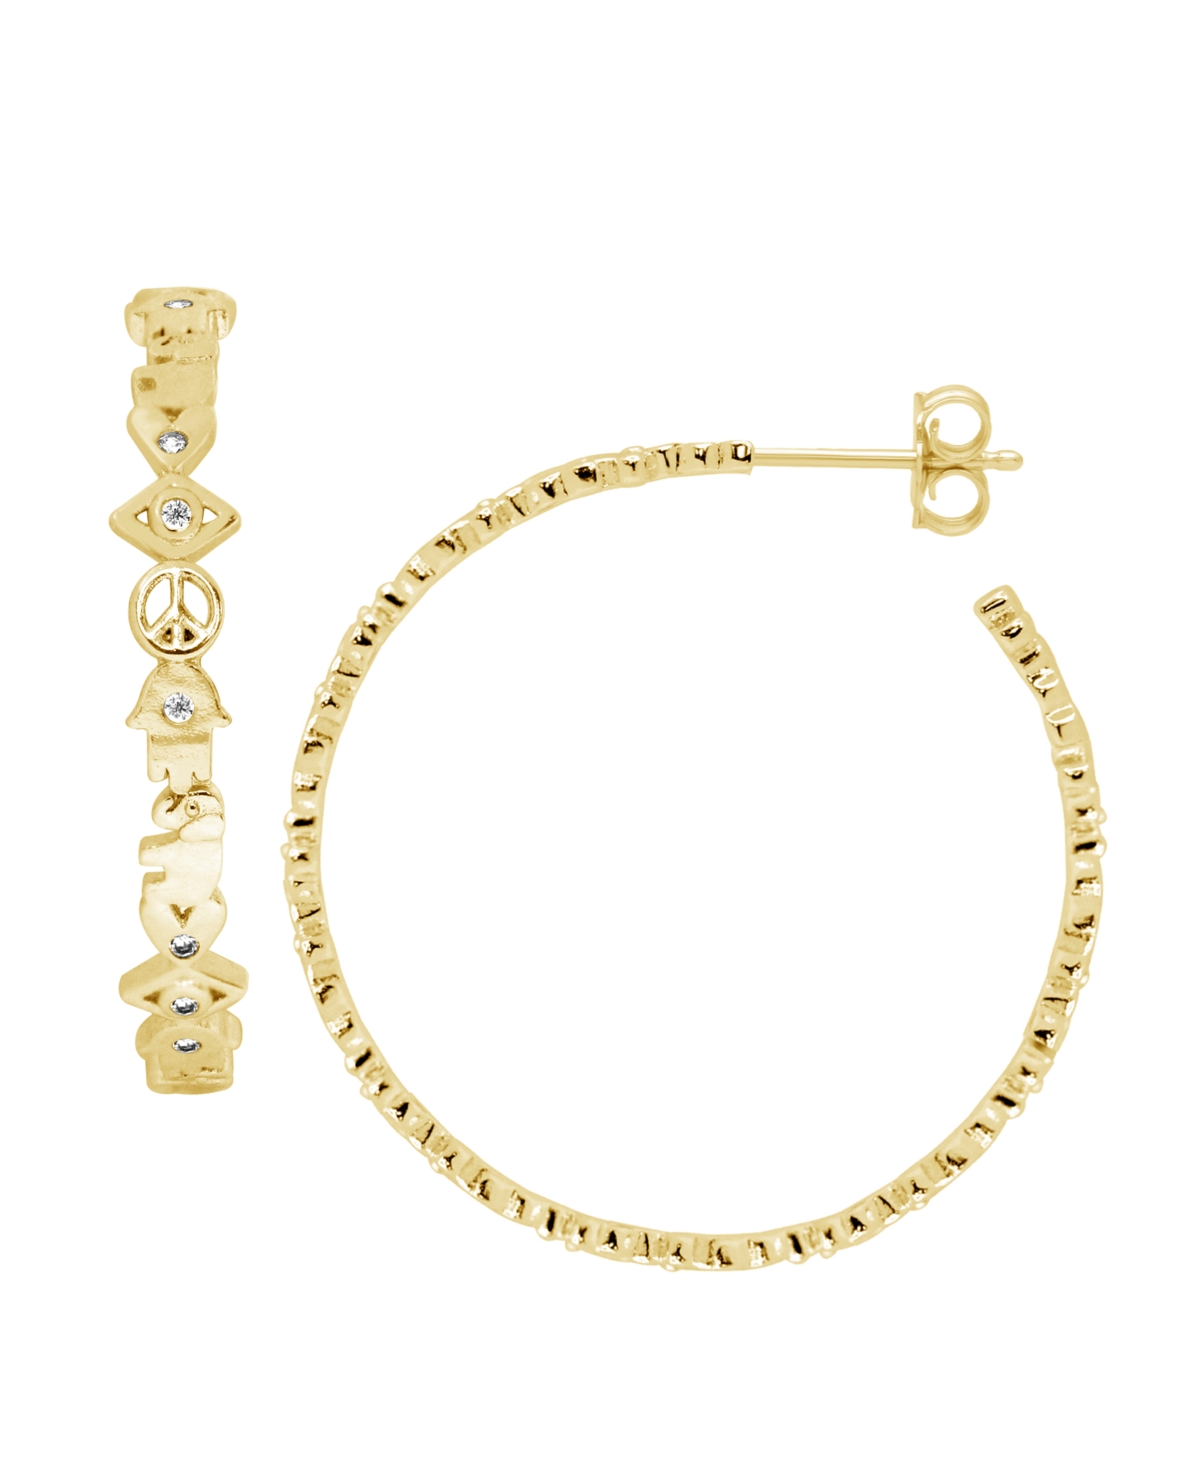 Good Luck Symbols C Hoop Earring with Cubic Zirconia Accents Gold Plated - Gold